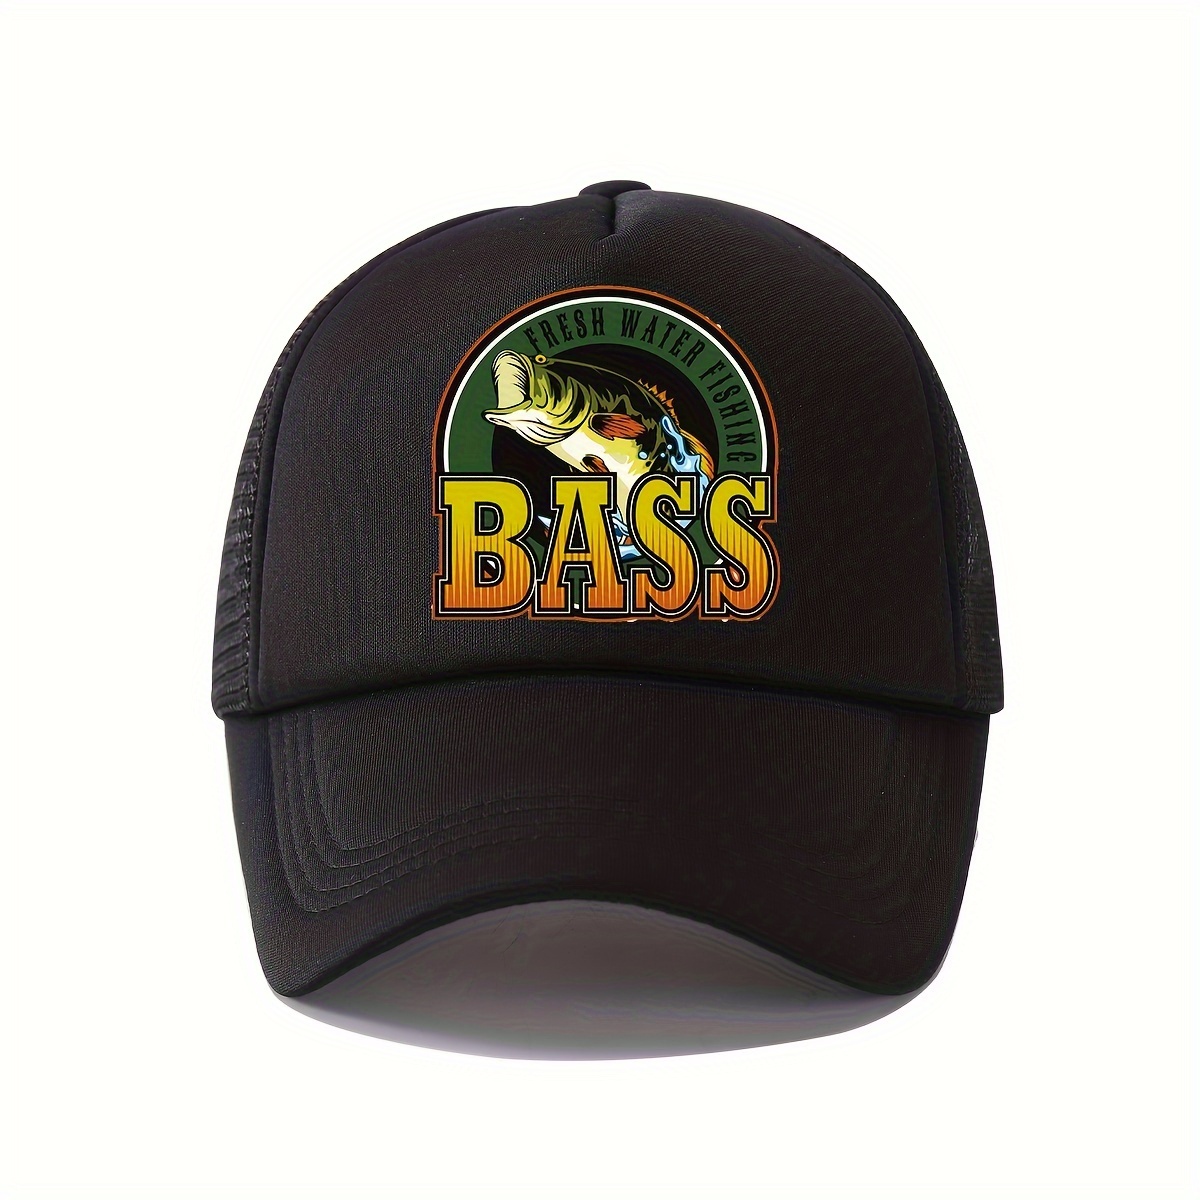 Bass Fishing Baseball Cap, Trucker Style Hat, Structured Leather Patch Hat,  Fisherman Baseball Hat, Gift for Men, Dad Hat, Father's Day 